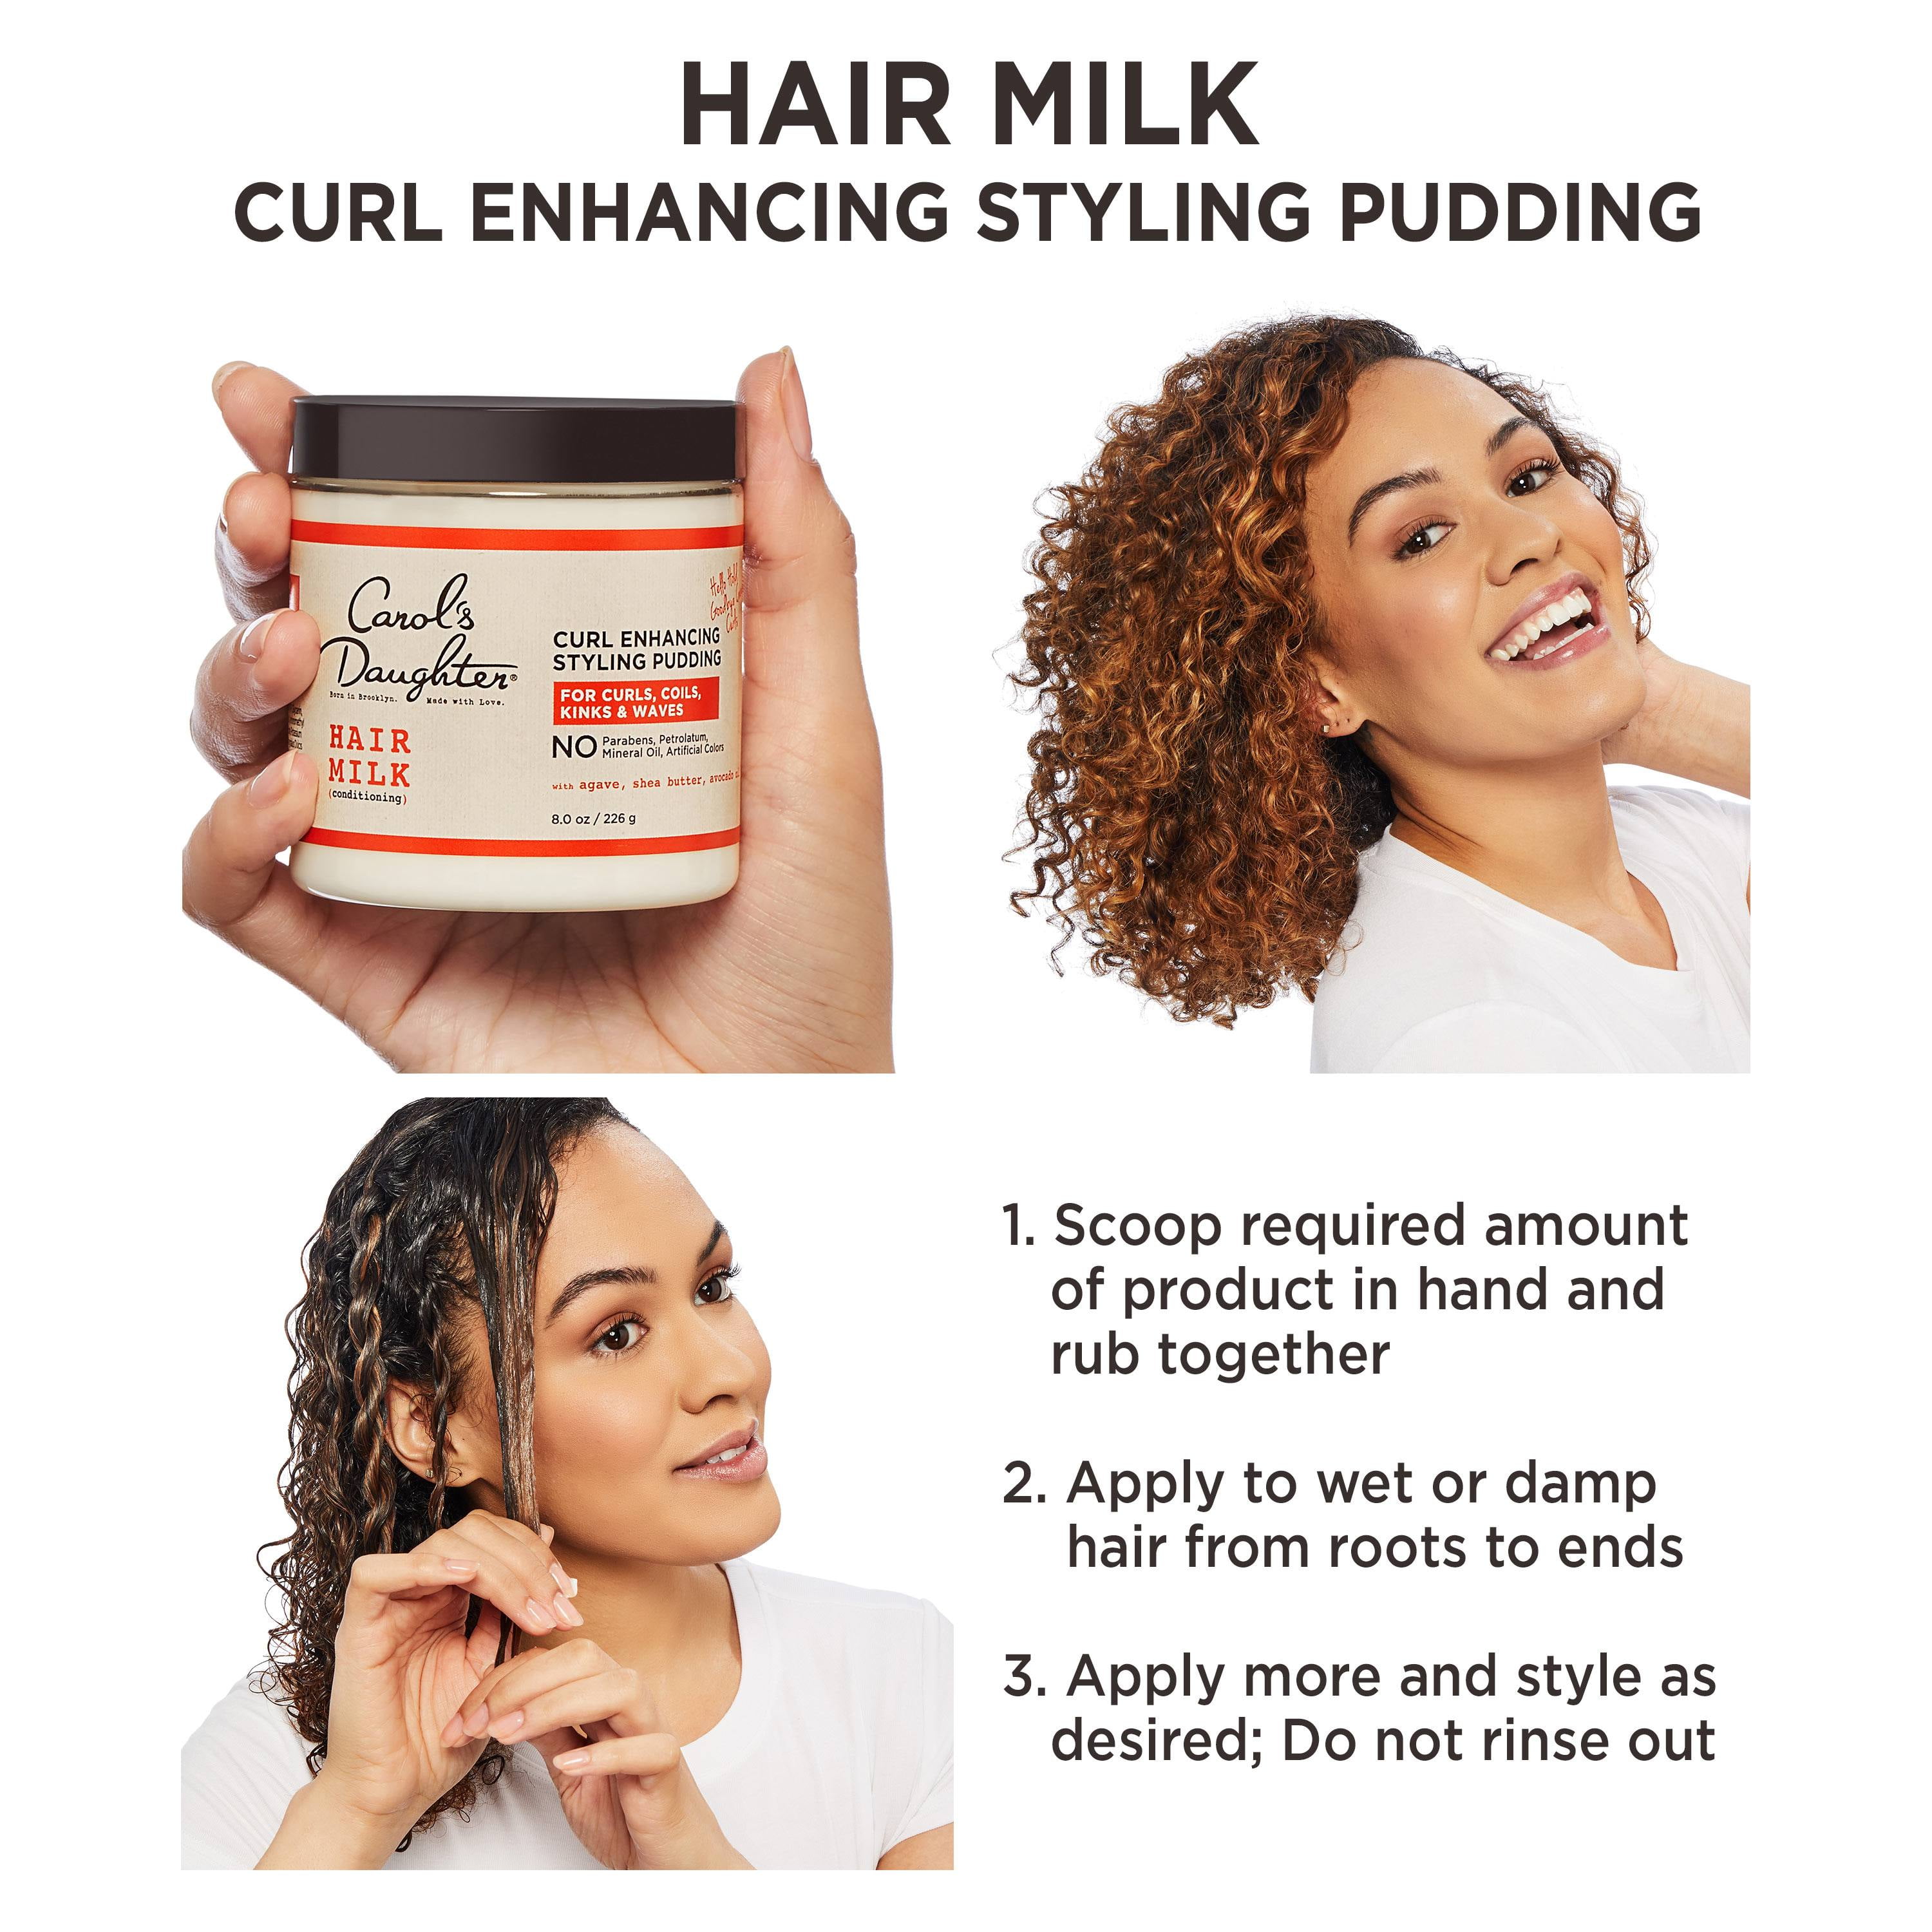 Carol's Daughter Hair Milk Conditioning Styling Pudding For Curls, Coils,  Kinks and Waves, 8 oz 